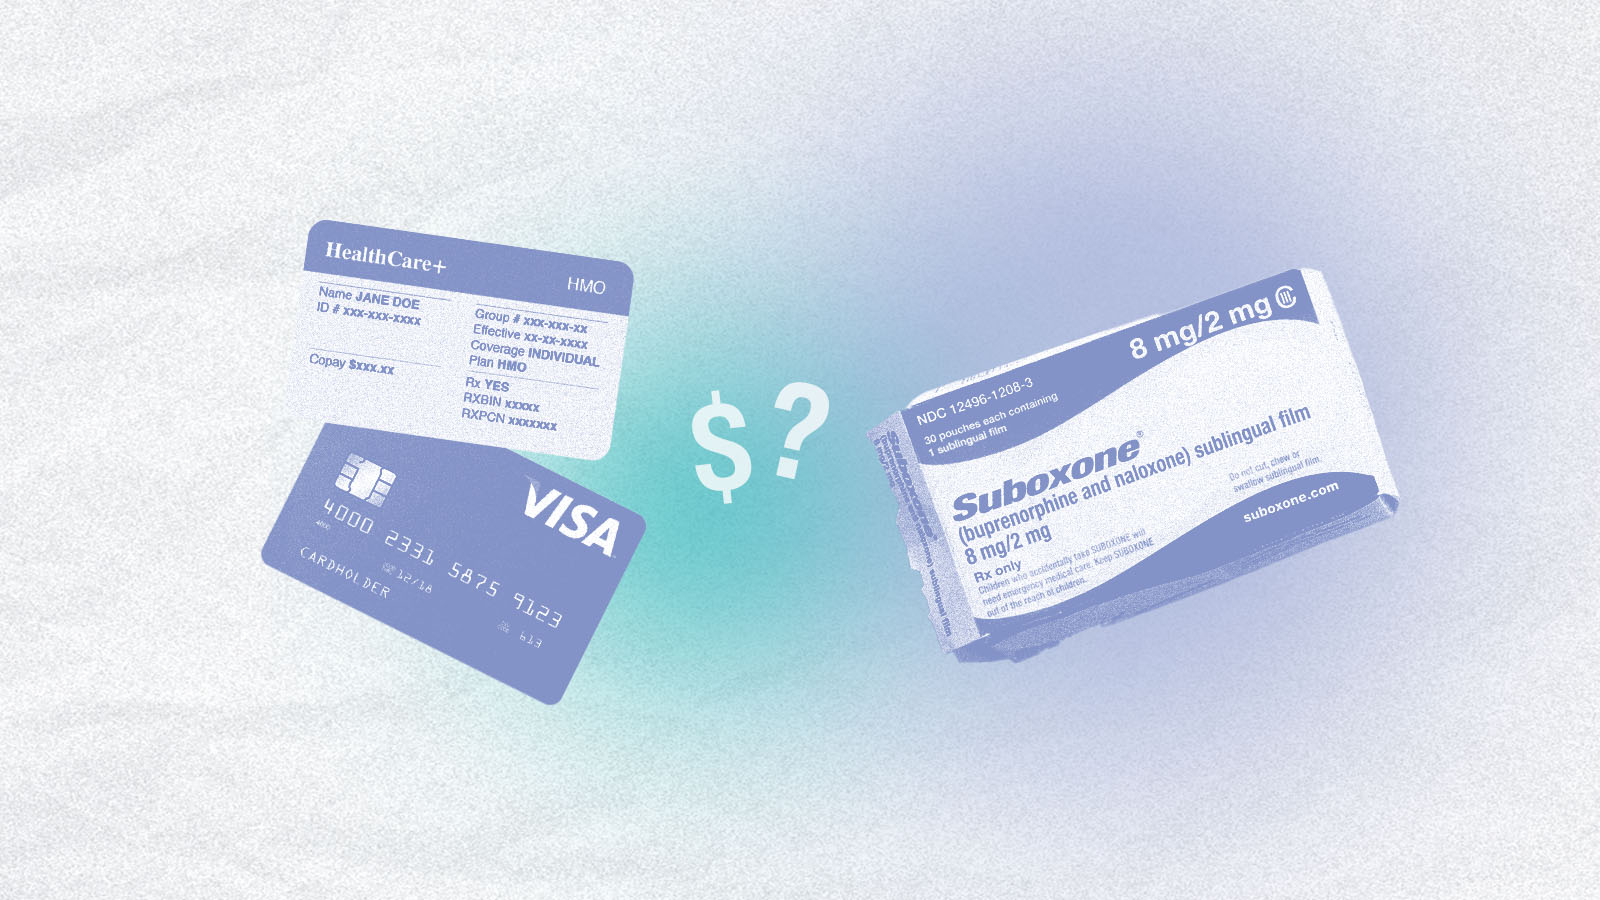 How Much Is Suboxone Without Insurance?